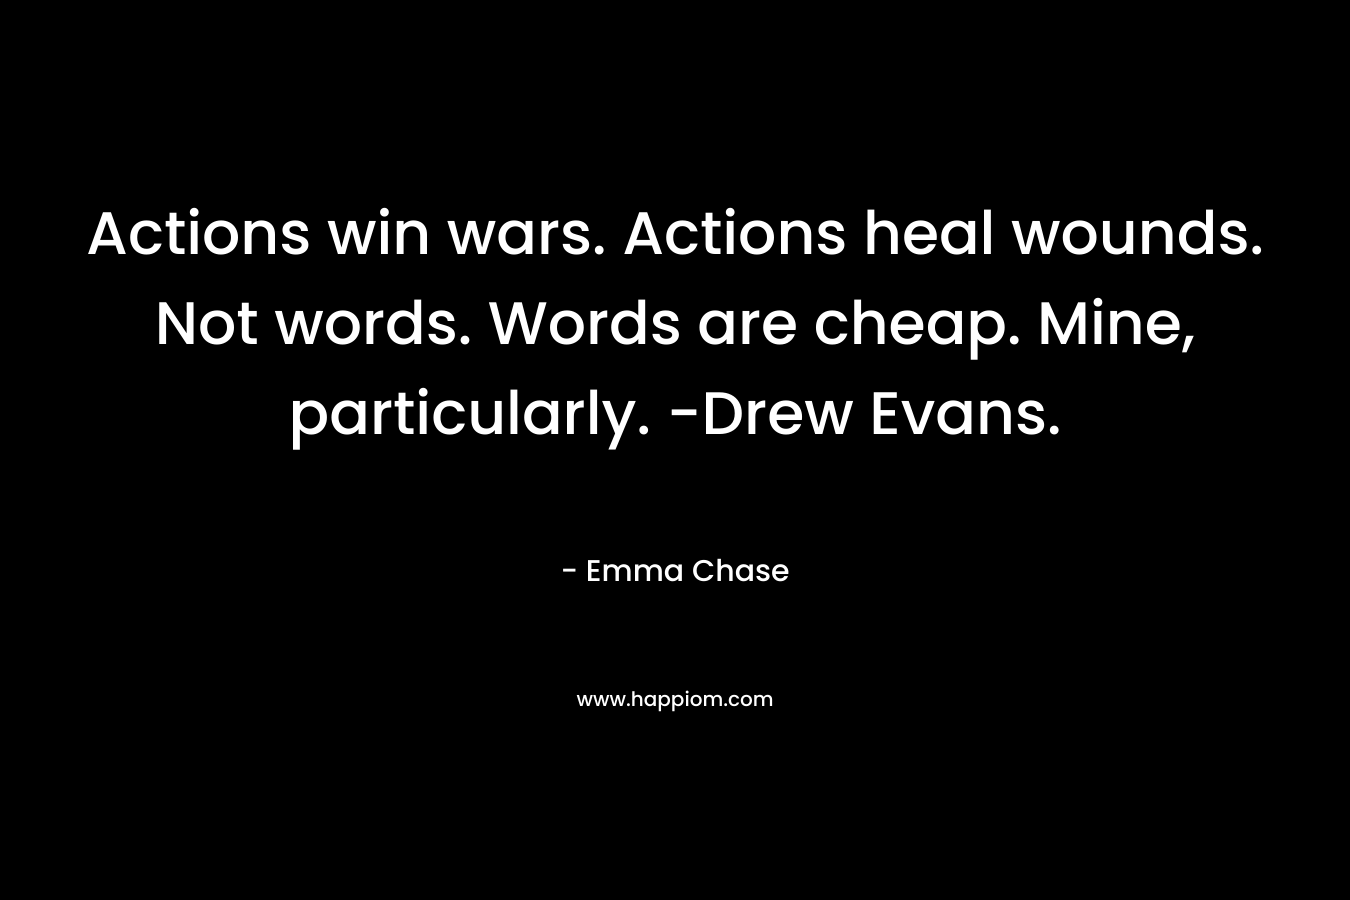 Actions win wars. Actions heal wounds. Not words. Words are cheap. Mine, particularly. -Drew Evans. – Emma Chase